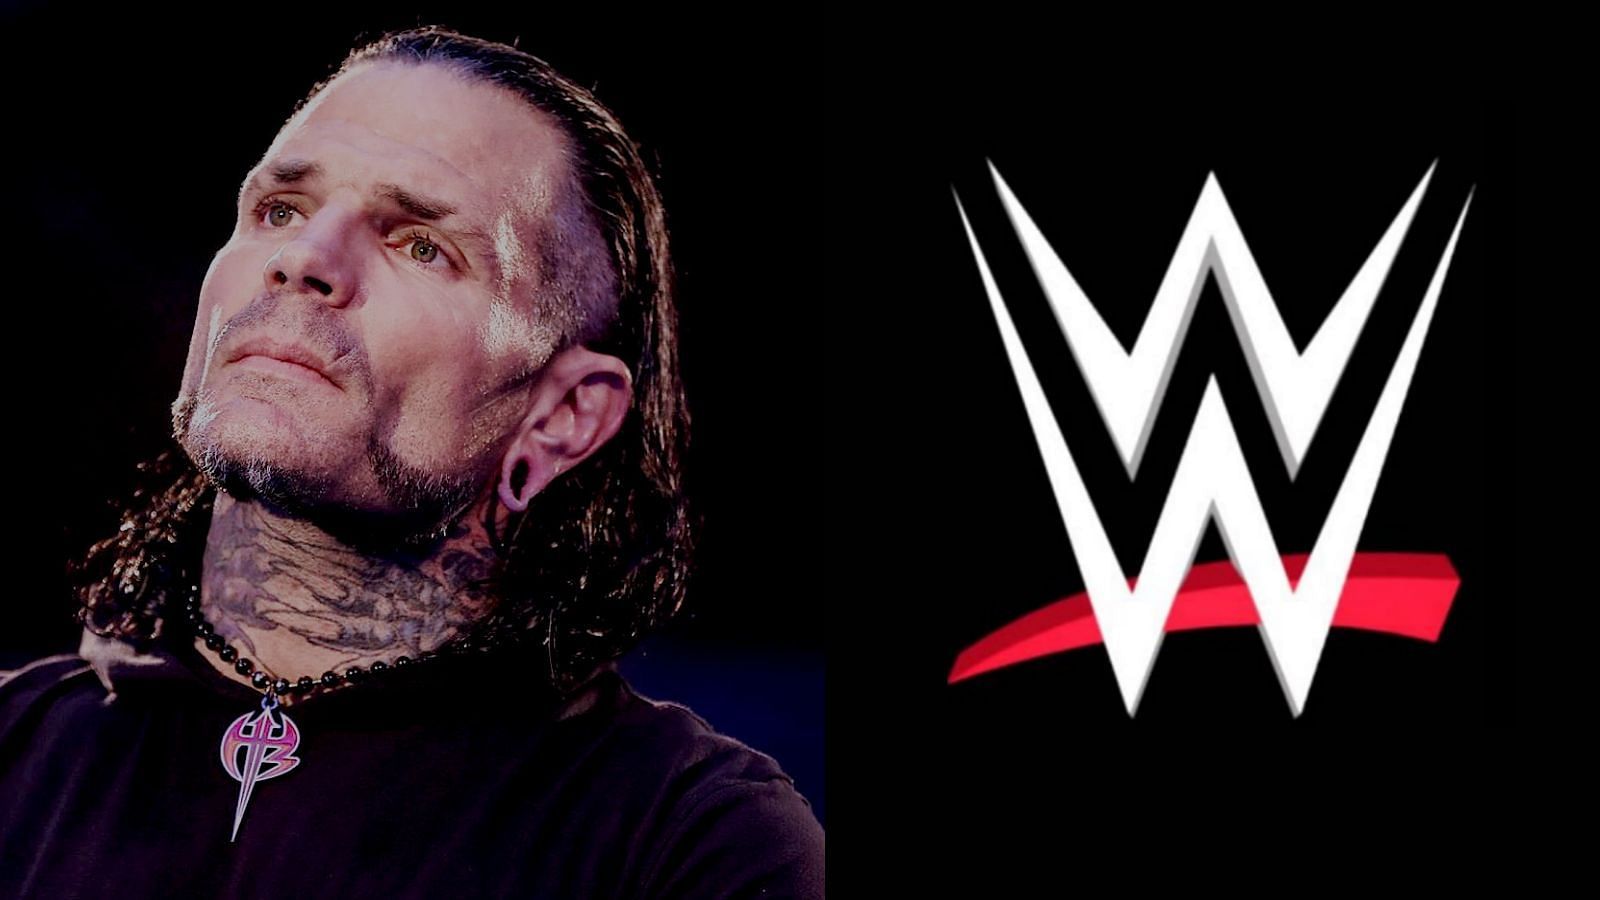 Have fans been too hard on Hardy?